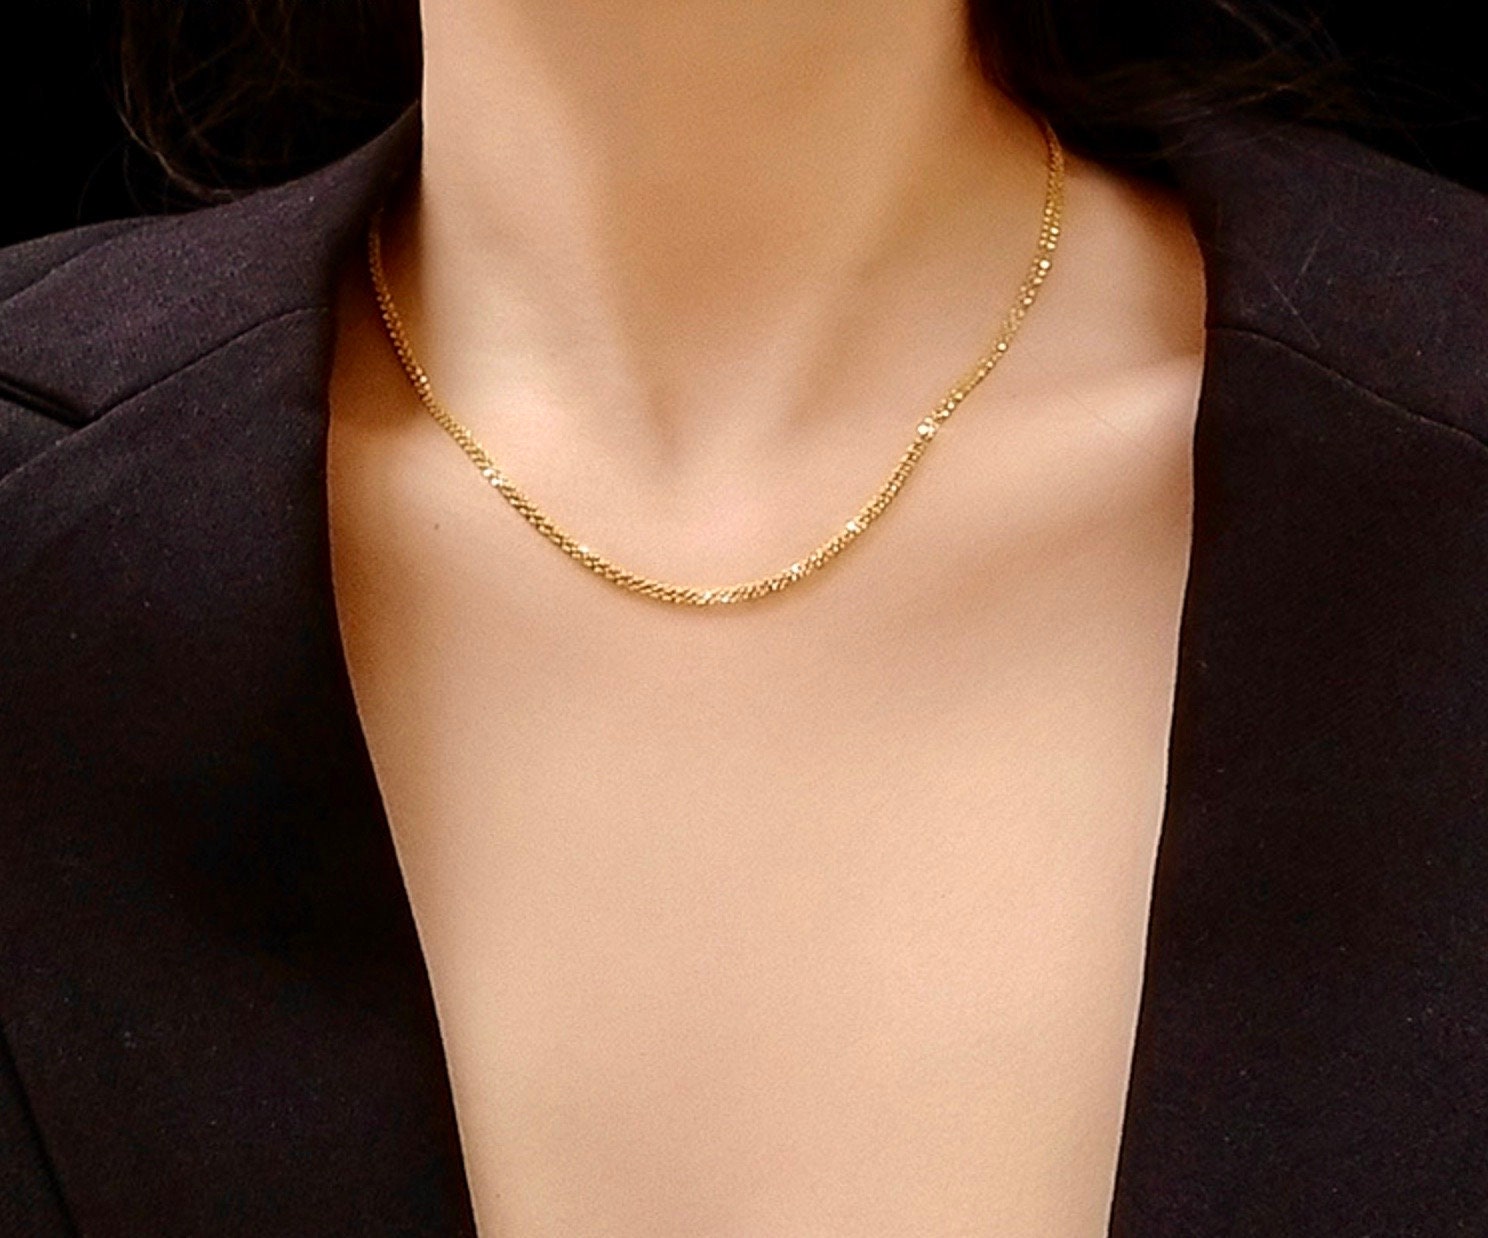 18K Gold Chain Necklace, Cable Chain, Paperclip Chain, Twist Chain, Figaro,  Curb Chain, Pearl Bead Chain, Chain for Kids, Mothers Day Gift 